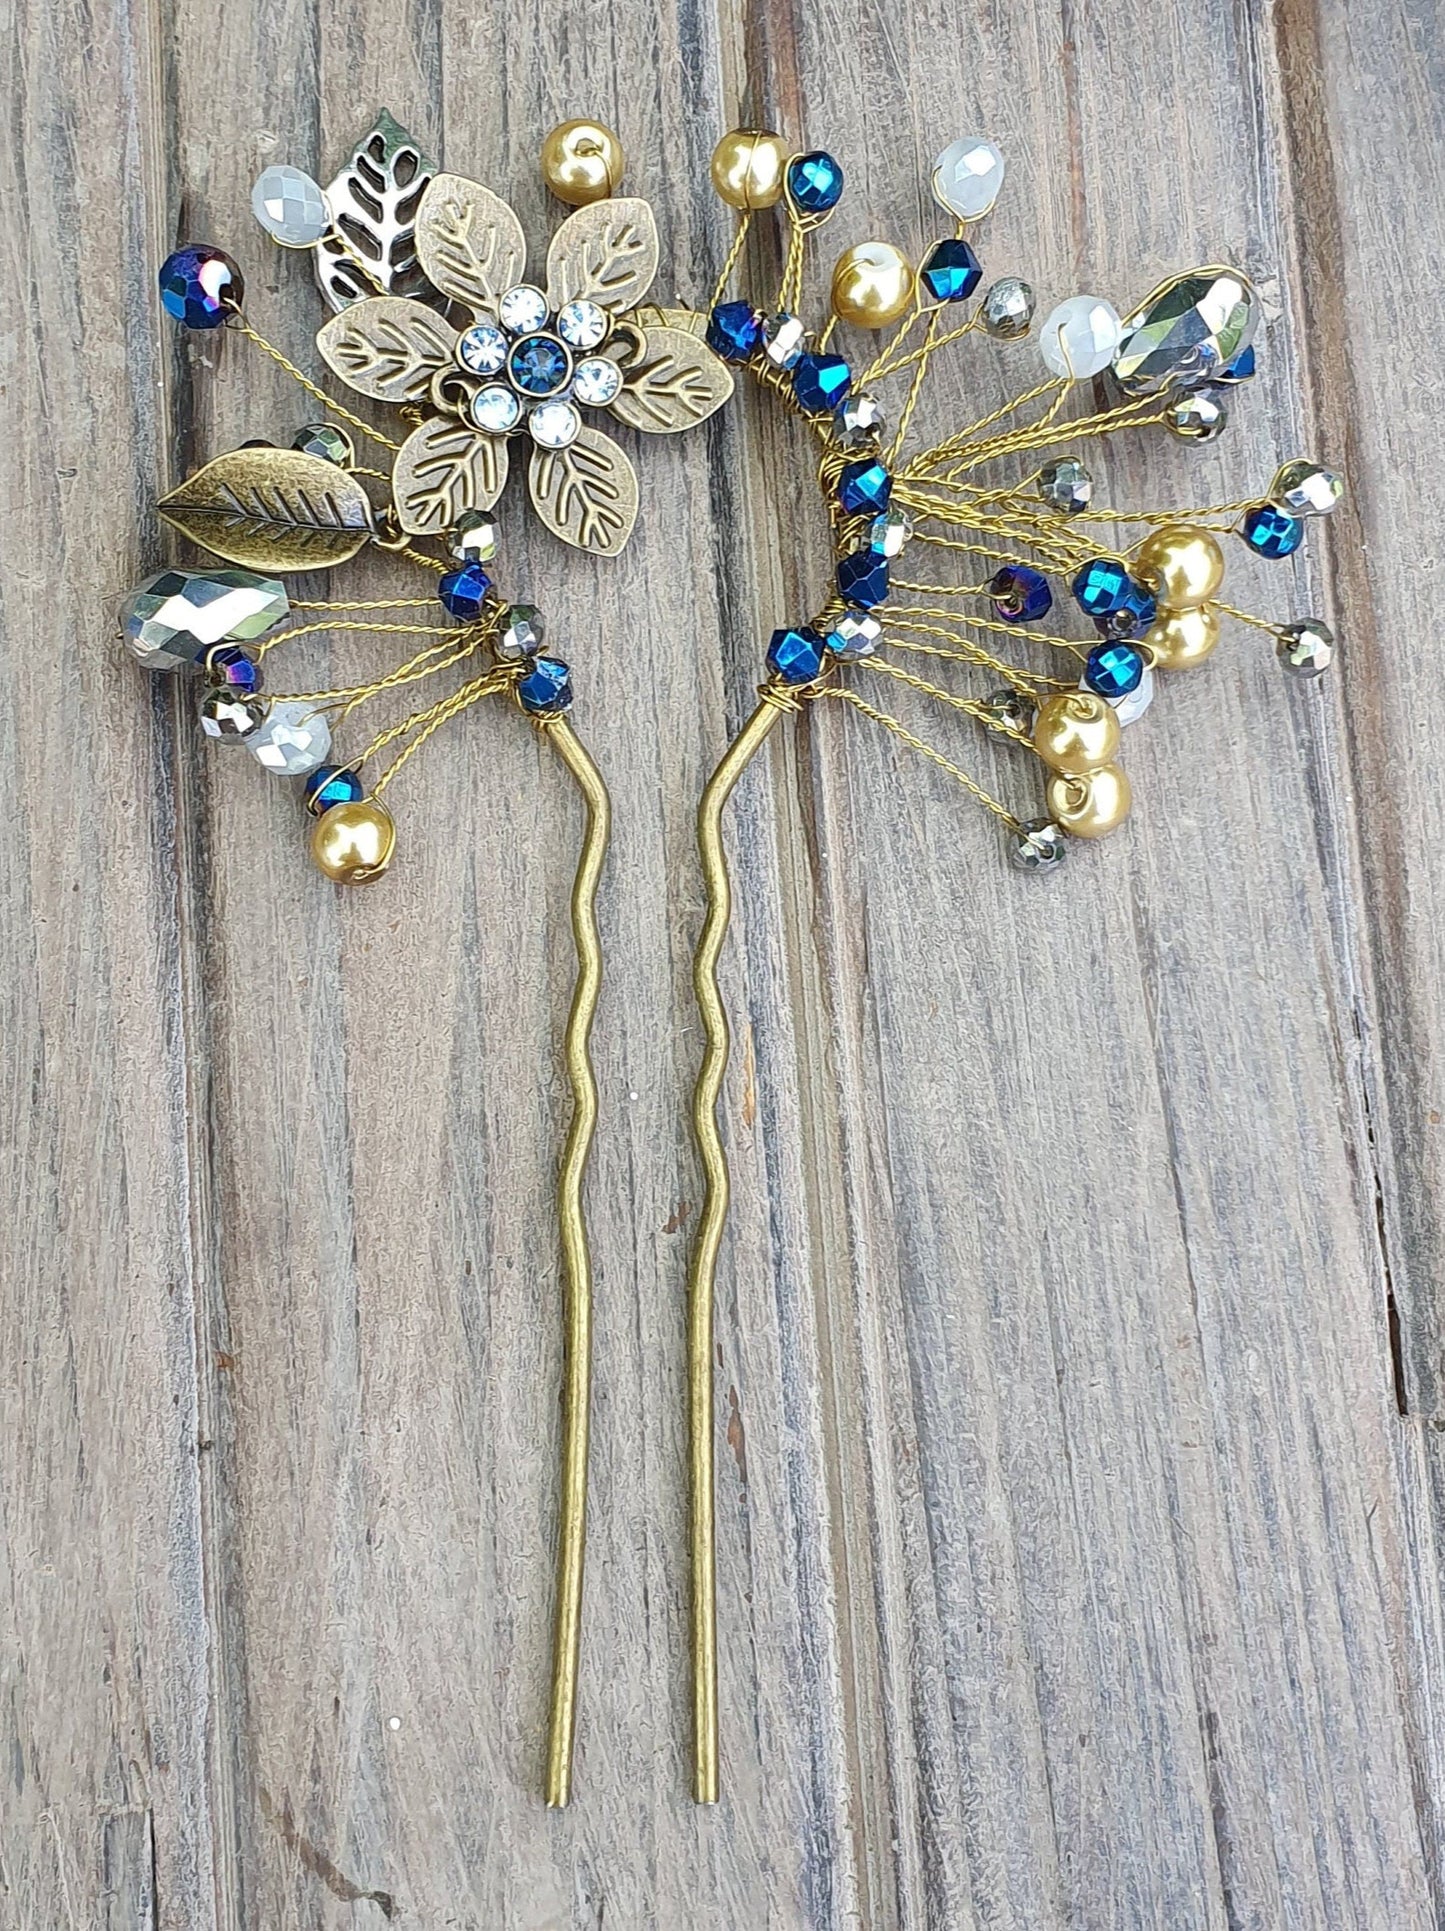 Elegant handmade hair comb with copper-colored metal comb and blue stones - bridal hair comb, hair accessories